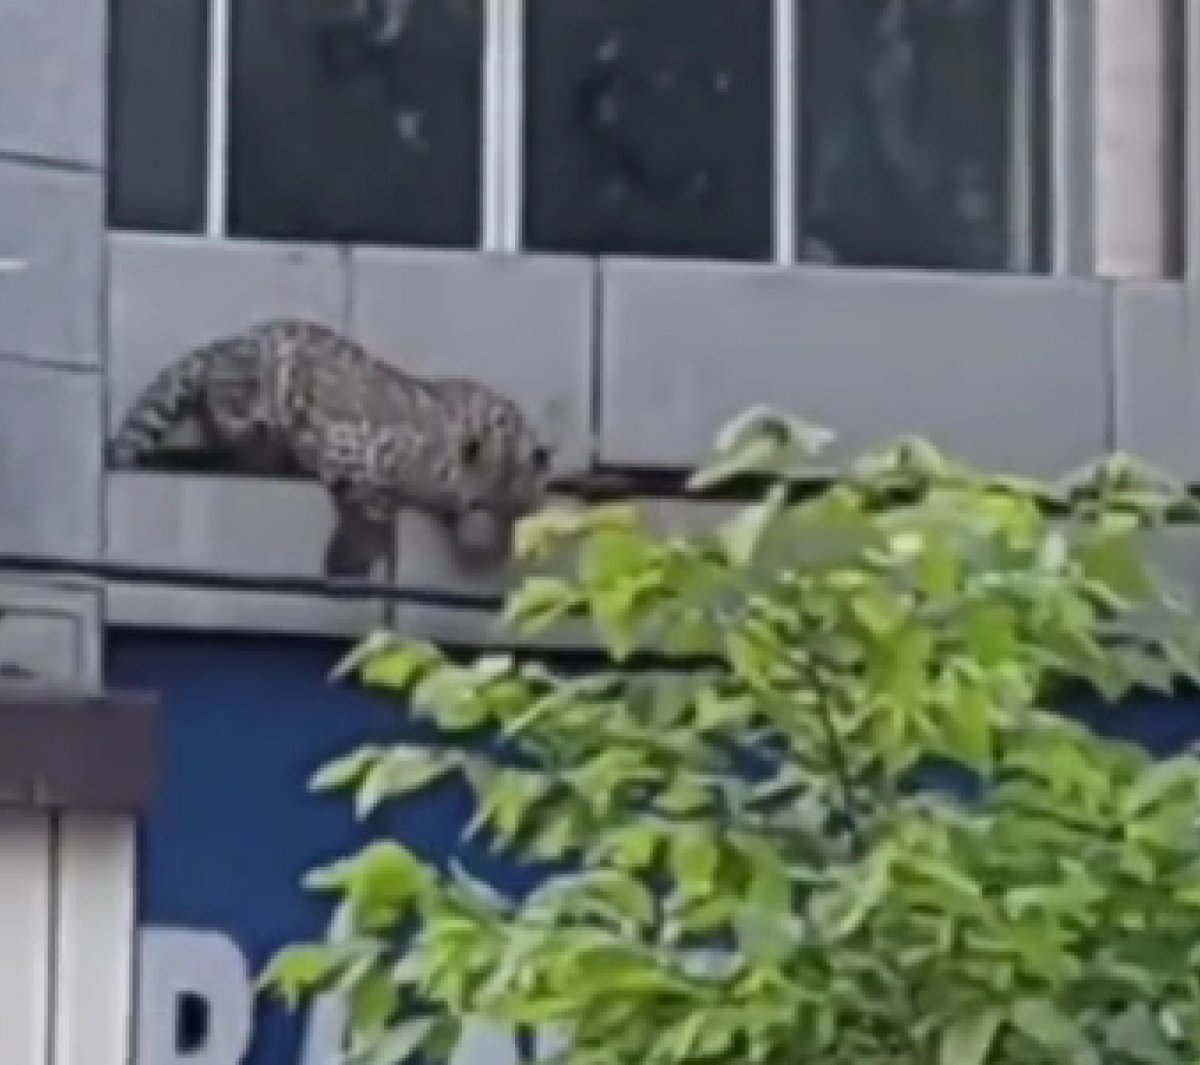 The leopard descending on the streets of Iran spread fear #2